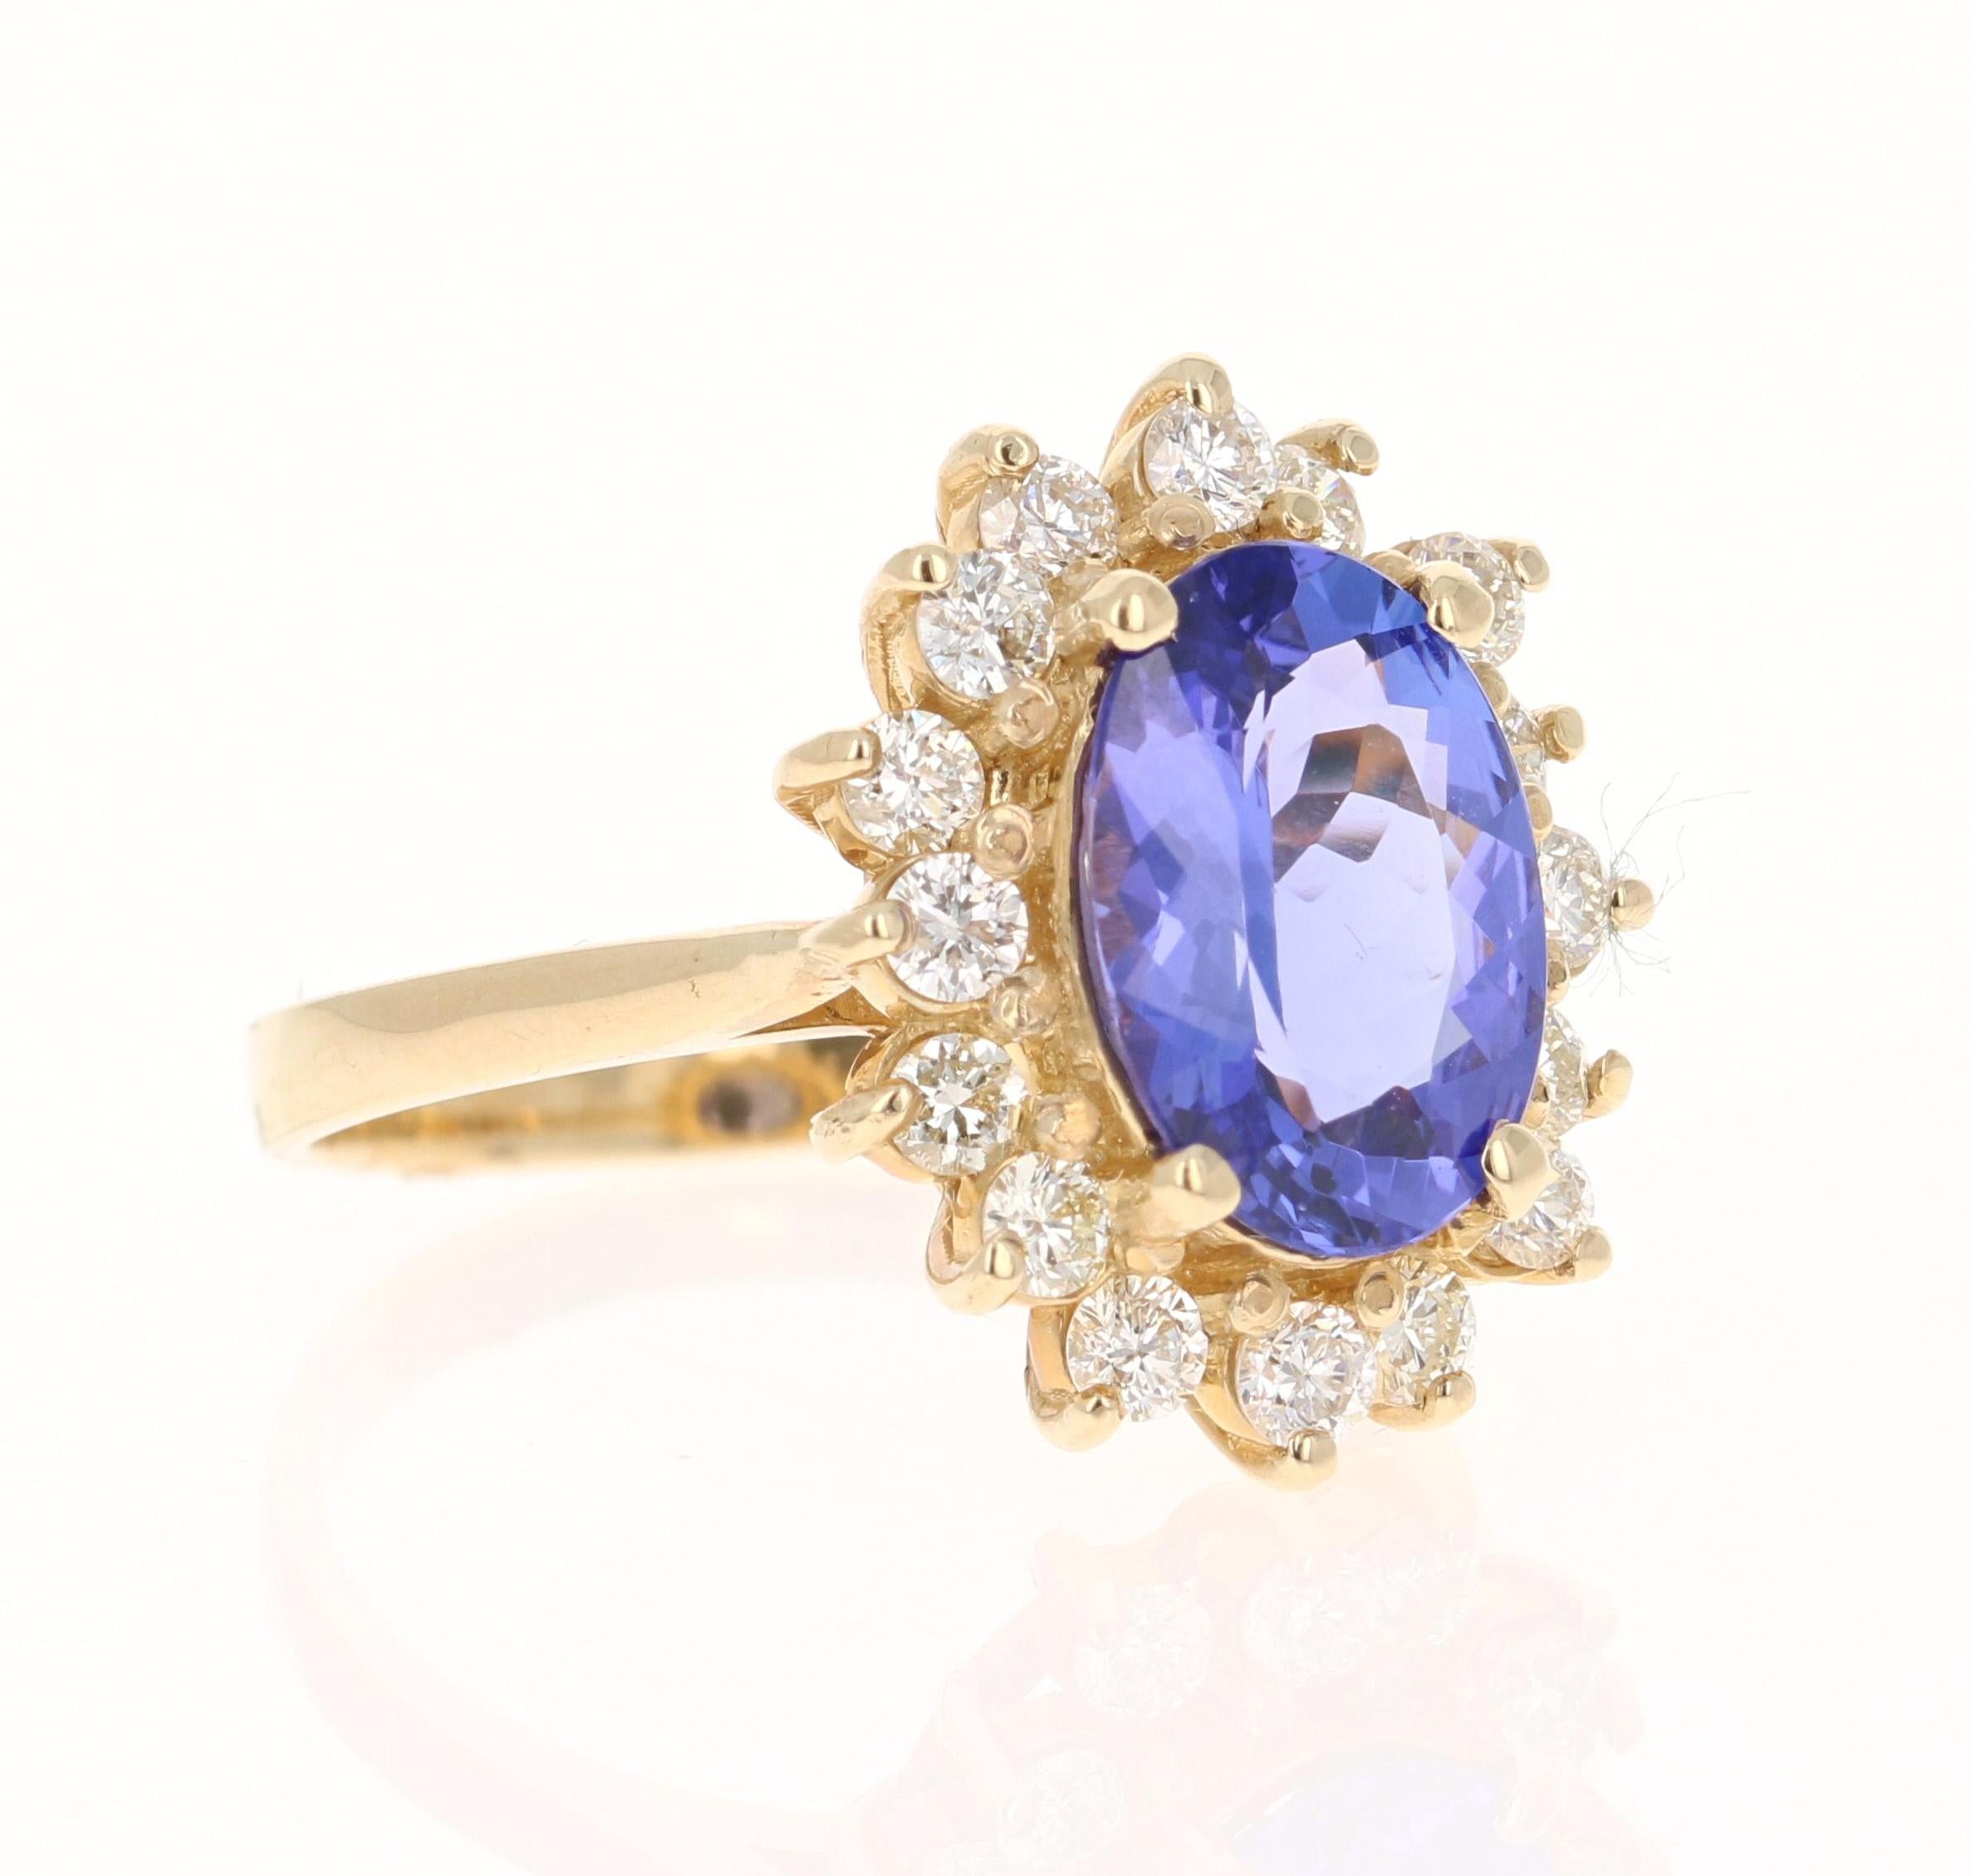 This beautiful ring has a vivid 2.53 Carat Oval Cut Tanzanite. The Tanzanite is surrounded by 16 Round Cut Diamonds that weigh 0.72 carats. (Clarity: SI1, Color: H) The total carat weight of the ring is 3.25 carats. The Oval Cut Tanzanite measures